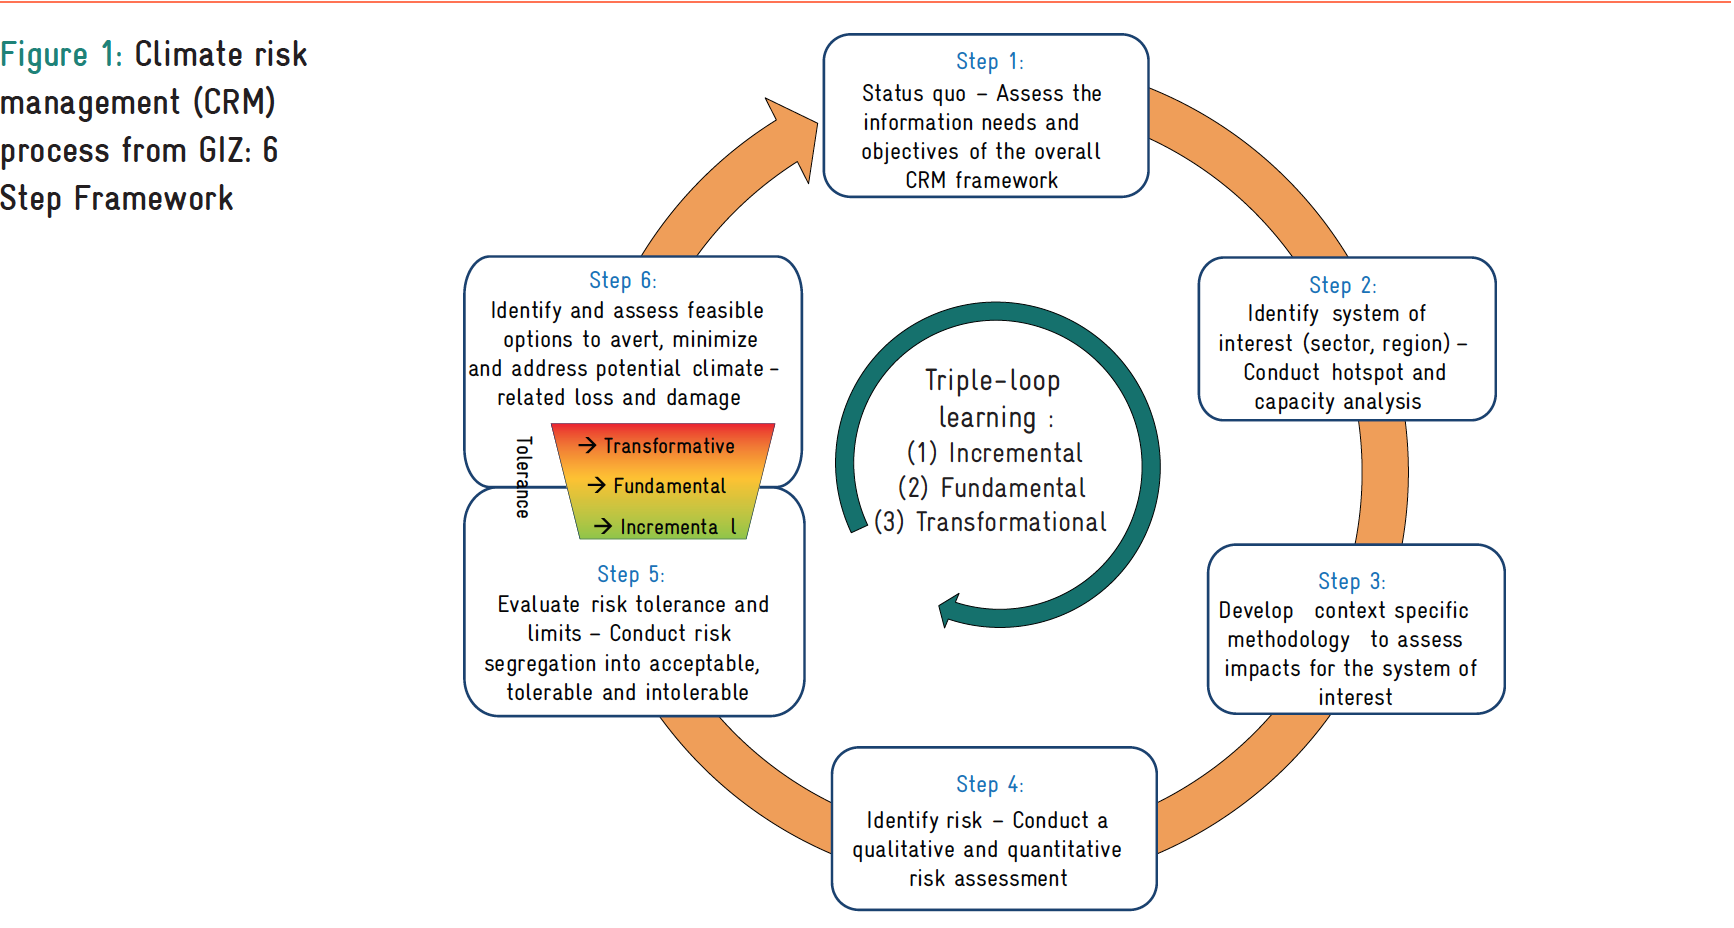 An image of a diagram explaining the Climate Risk Management process from GIZ